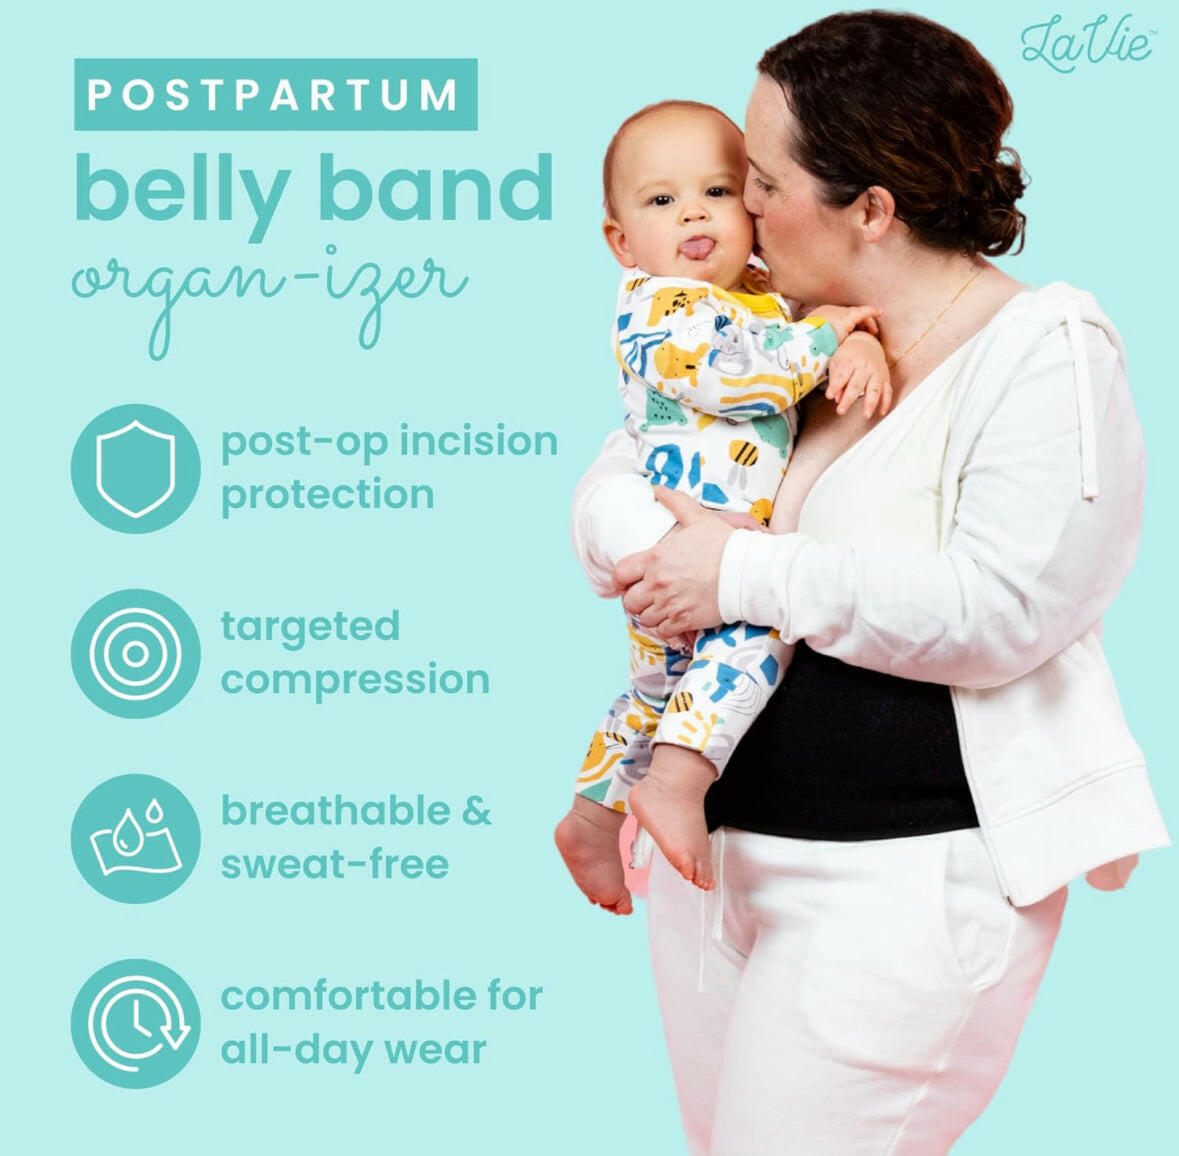 LaVie Postpartum Belly Band Organizer abdominal binder, waist wrap for natural birth, c section recovery, post surgery compression and recovery